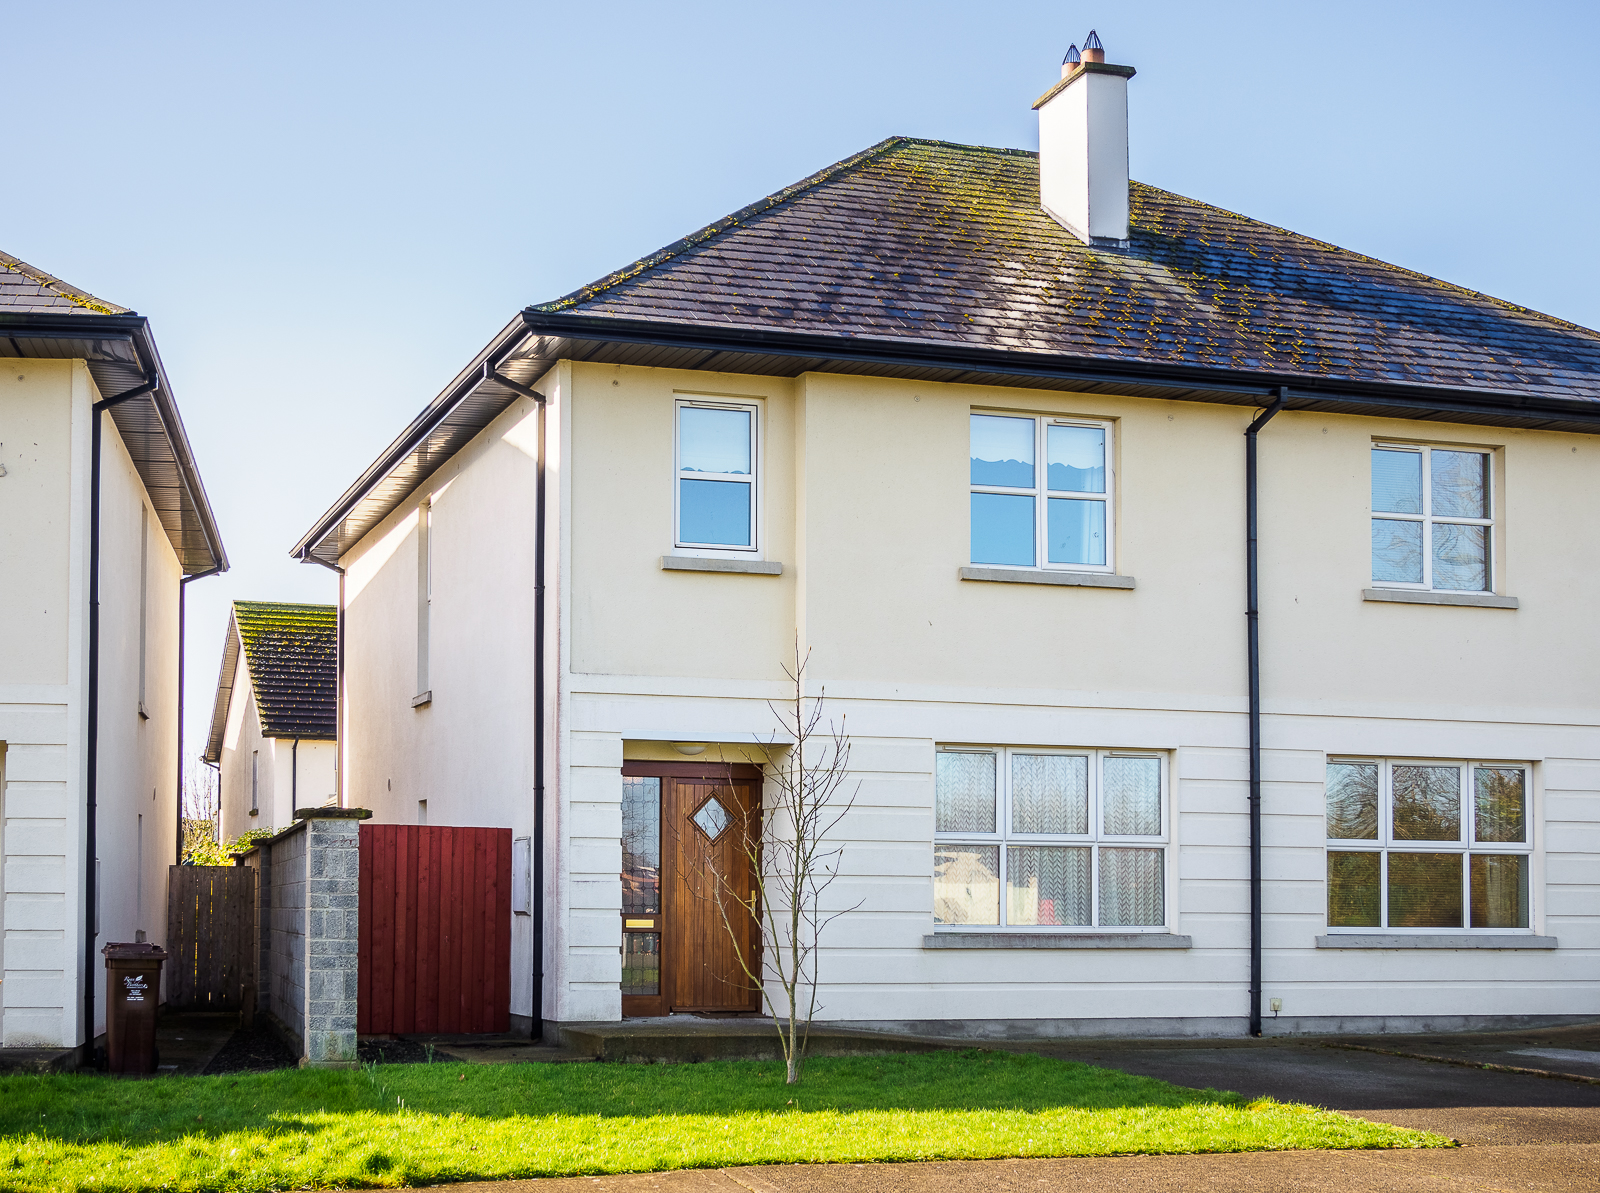 60 Springfield Crescent, Rossmore Village, Tipperary Town, Co. Tipperary